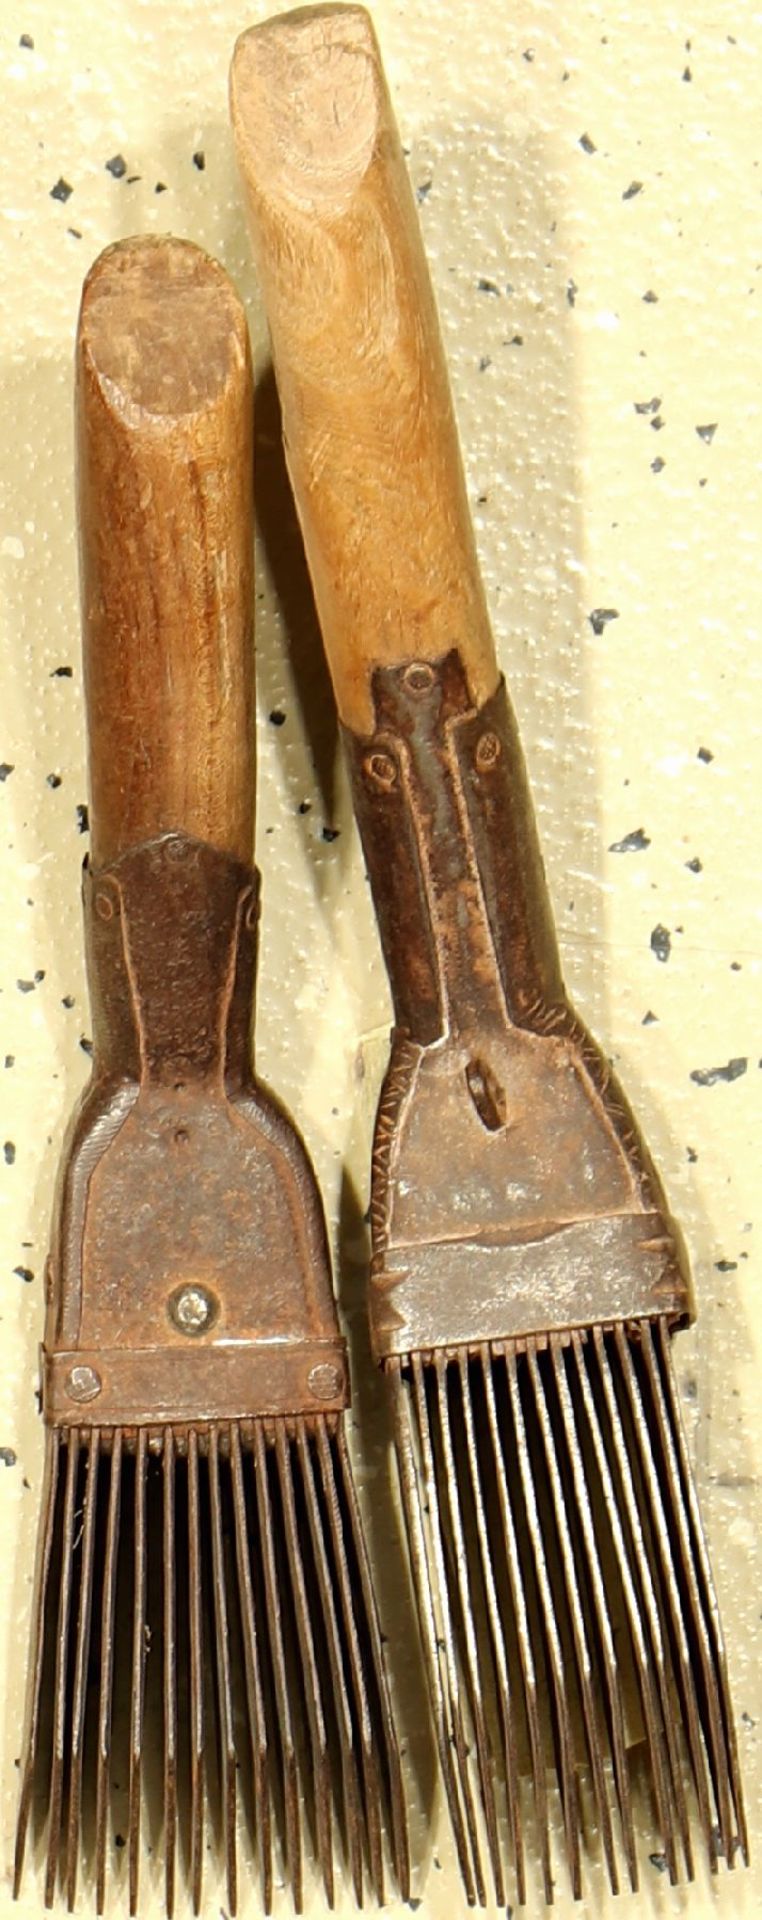 (2 lots) antique carpet combs, South Persia, around 1900, wood/iron, condition: 2. Auction: